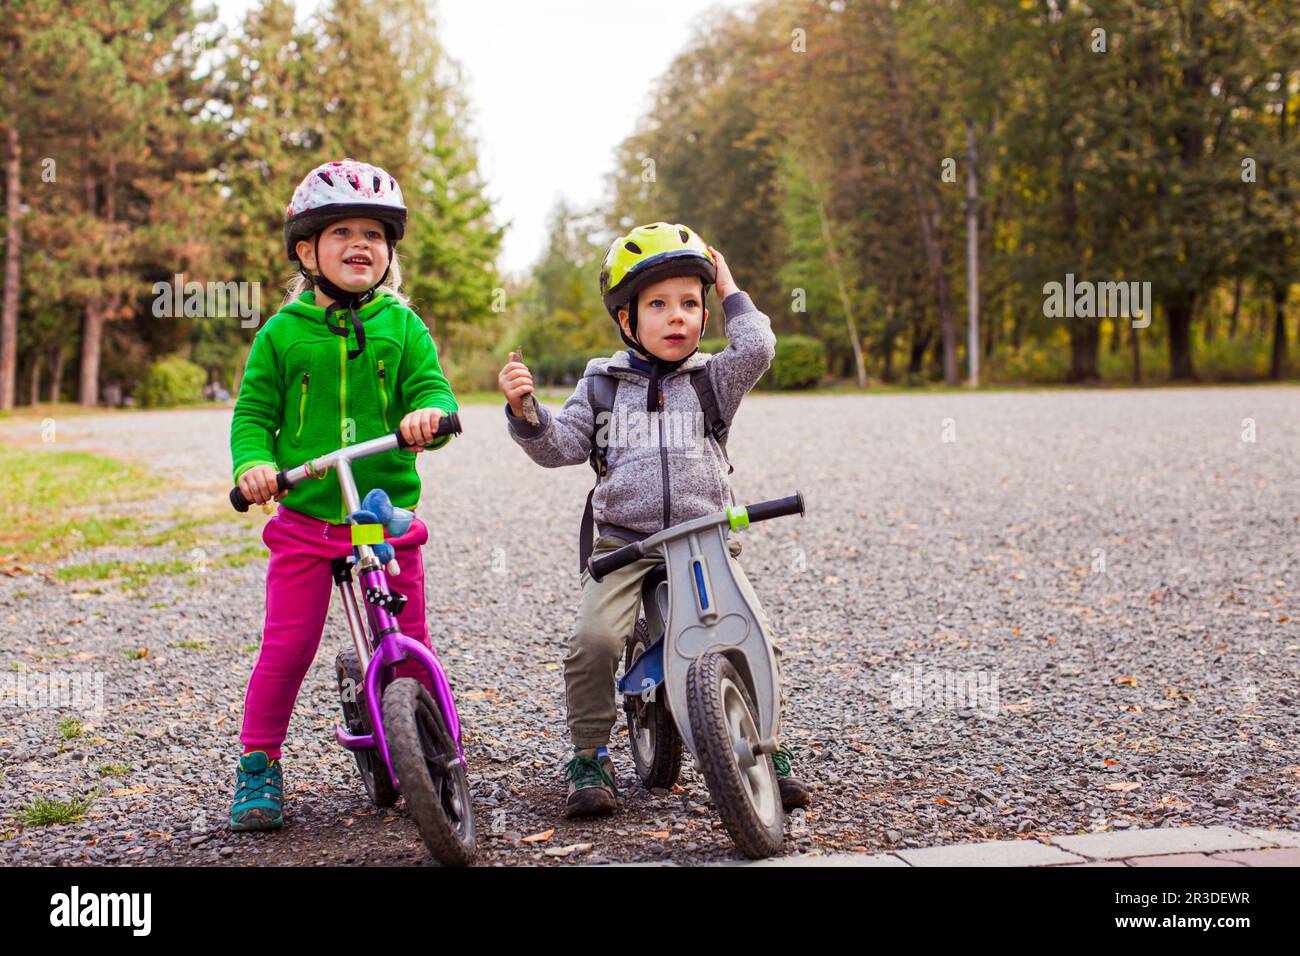 Sweet kids on balance bikes outdoors at the park Stock Photo